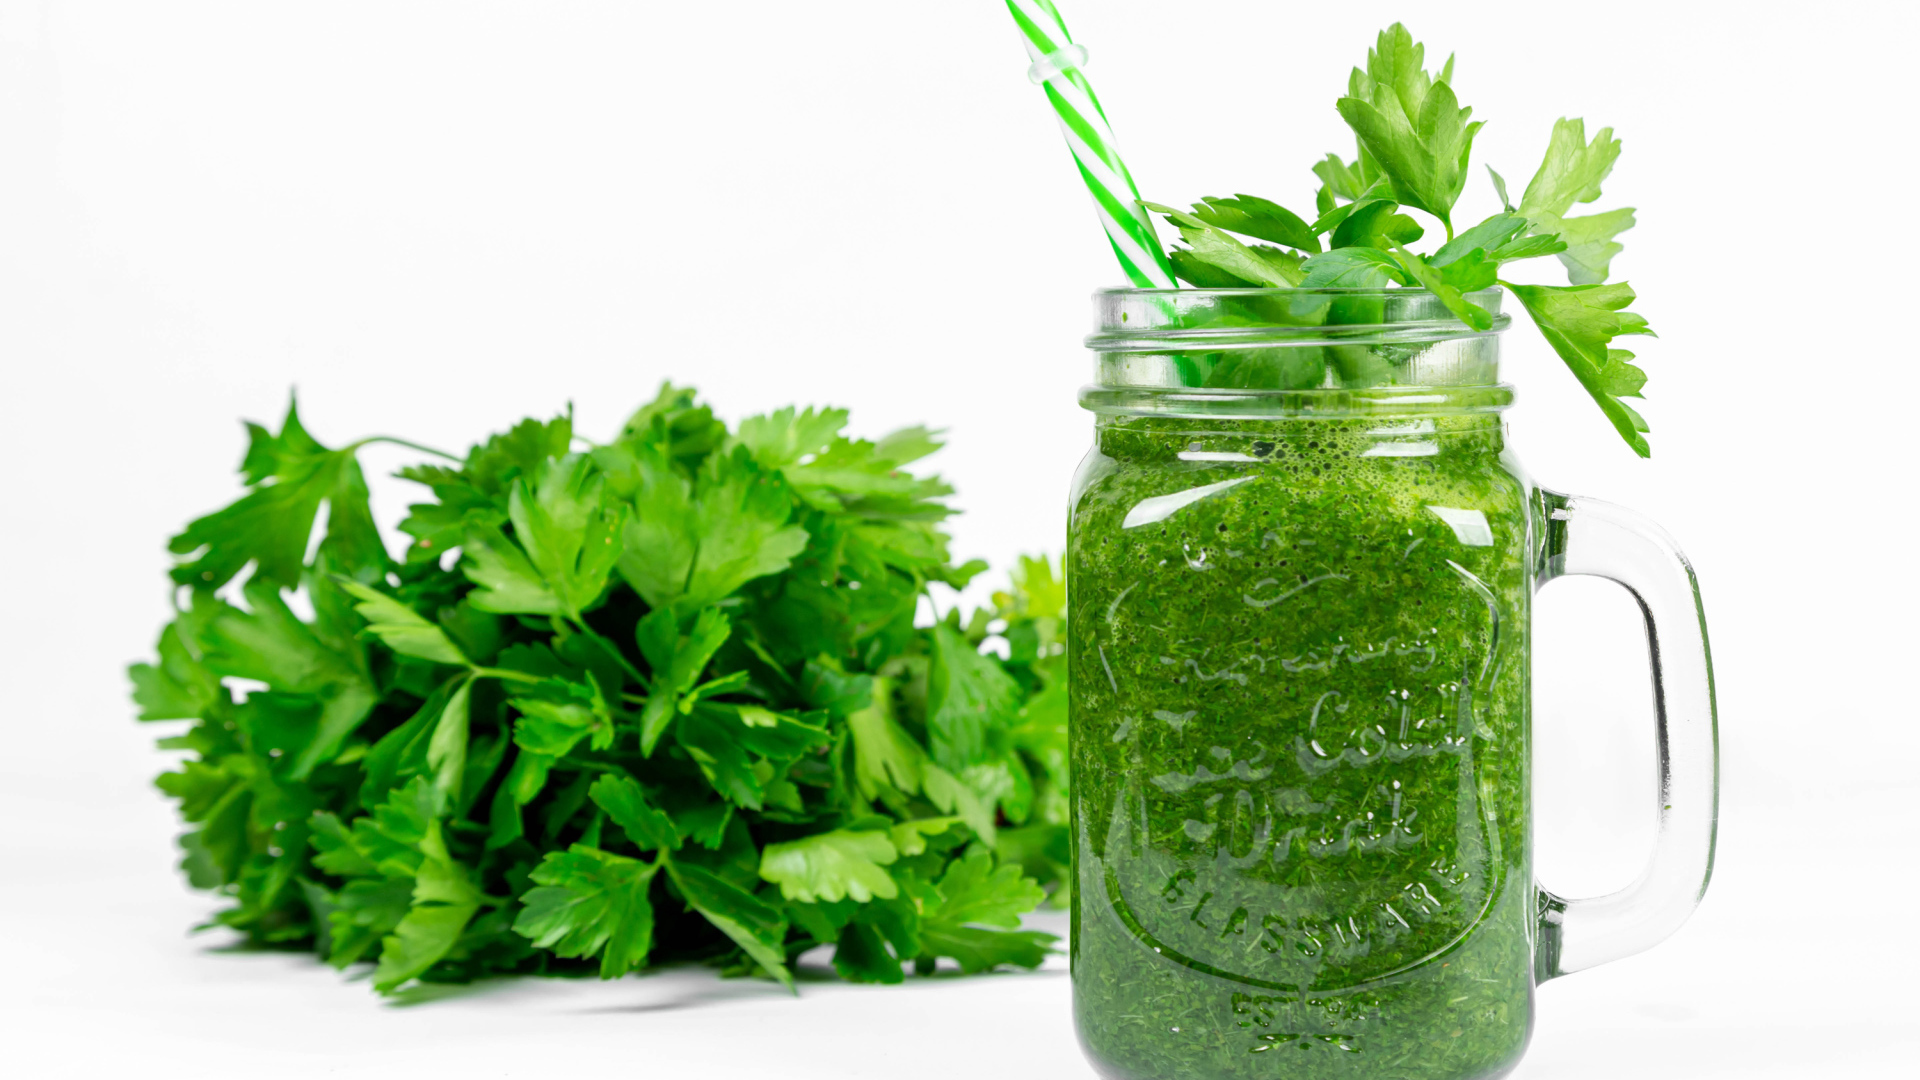 Green smoothie on the table with parsley